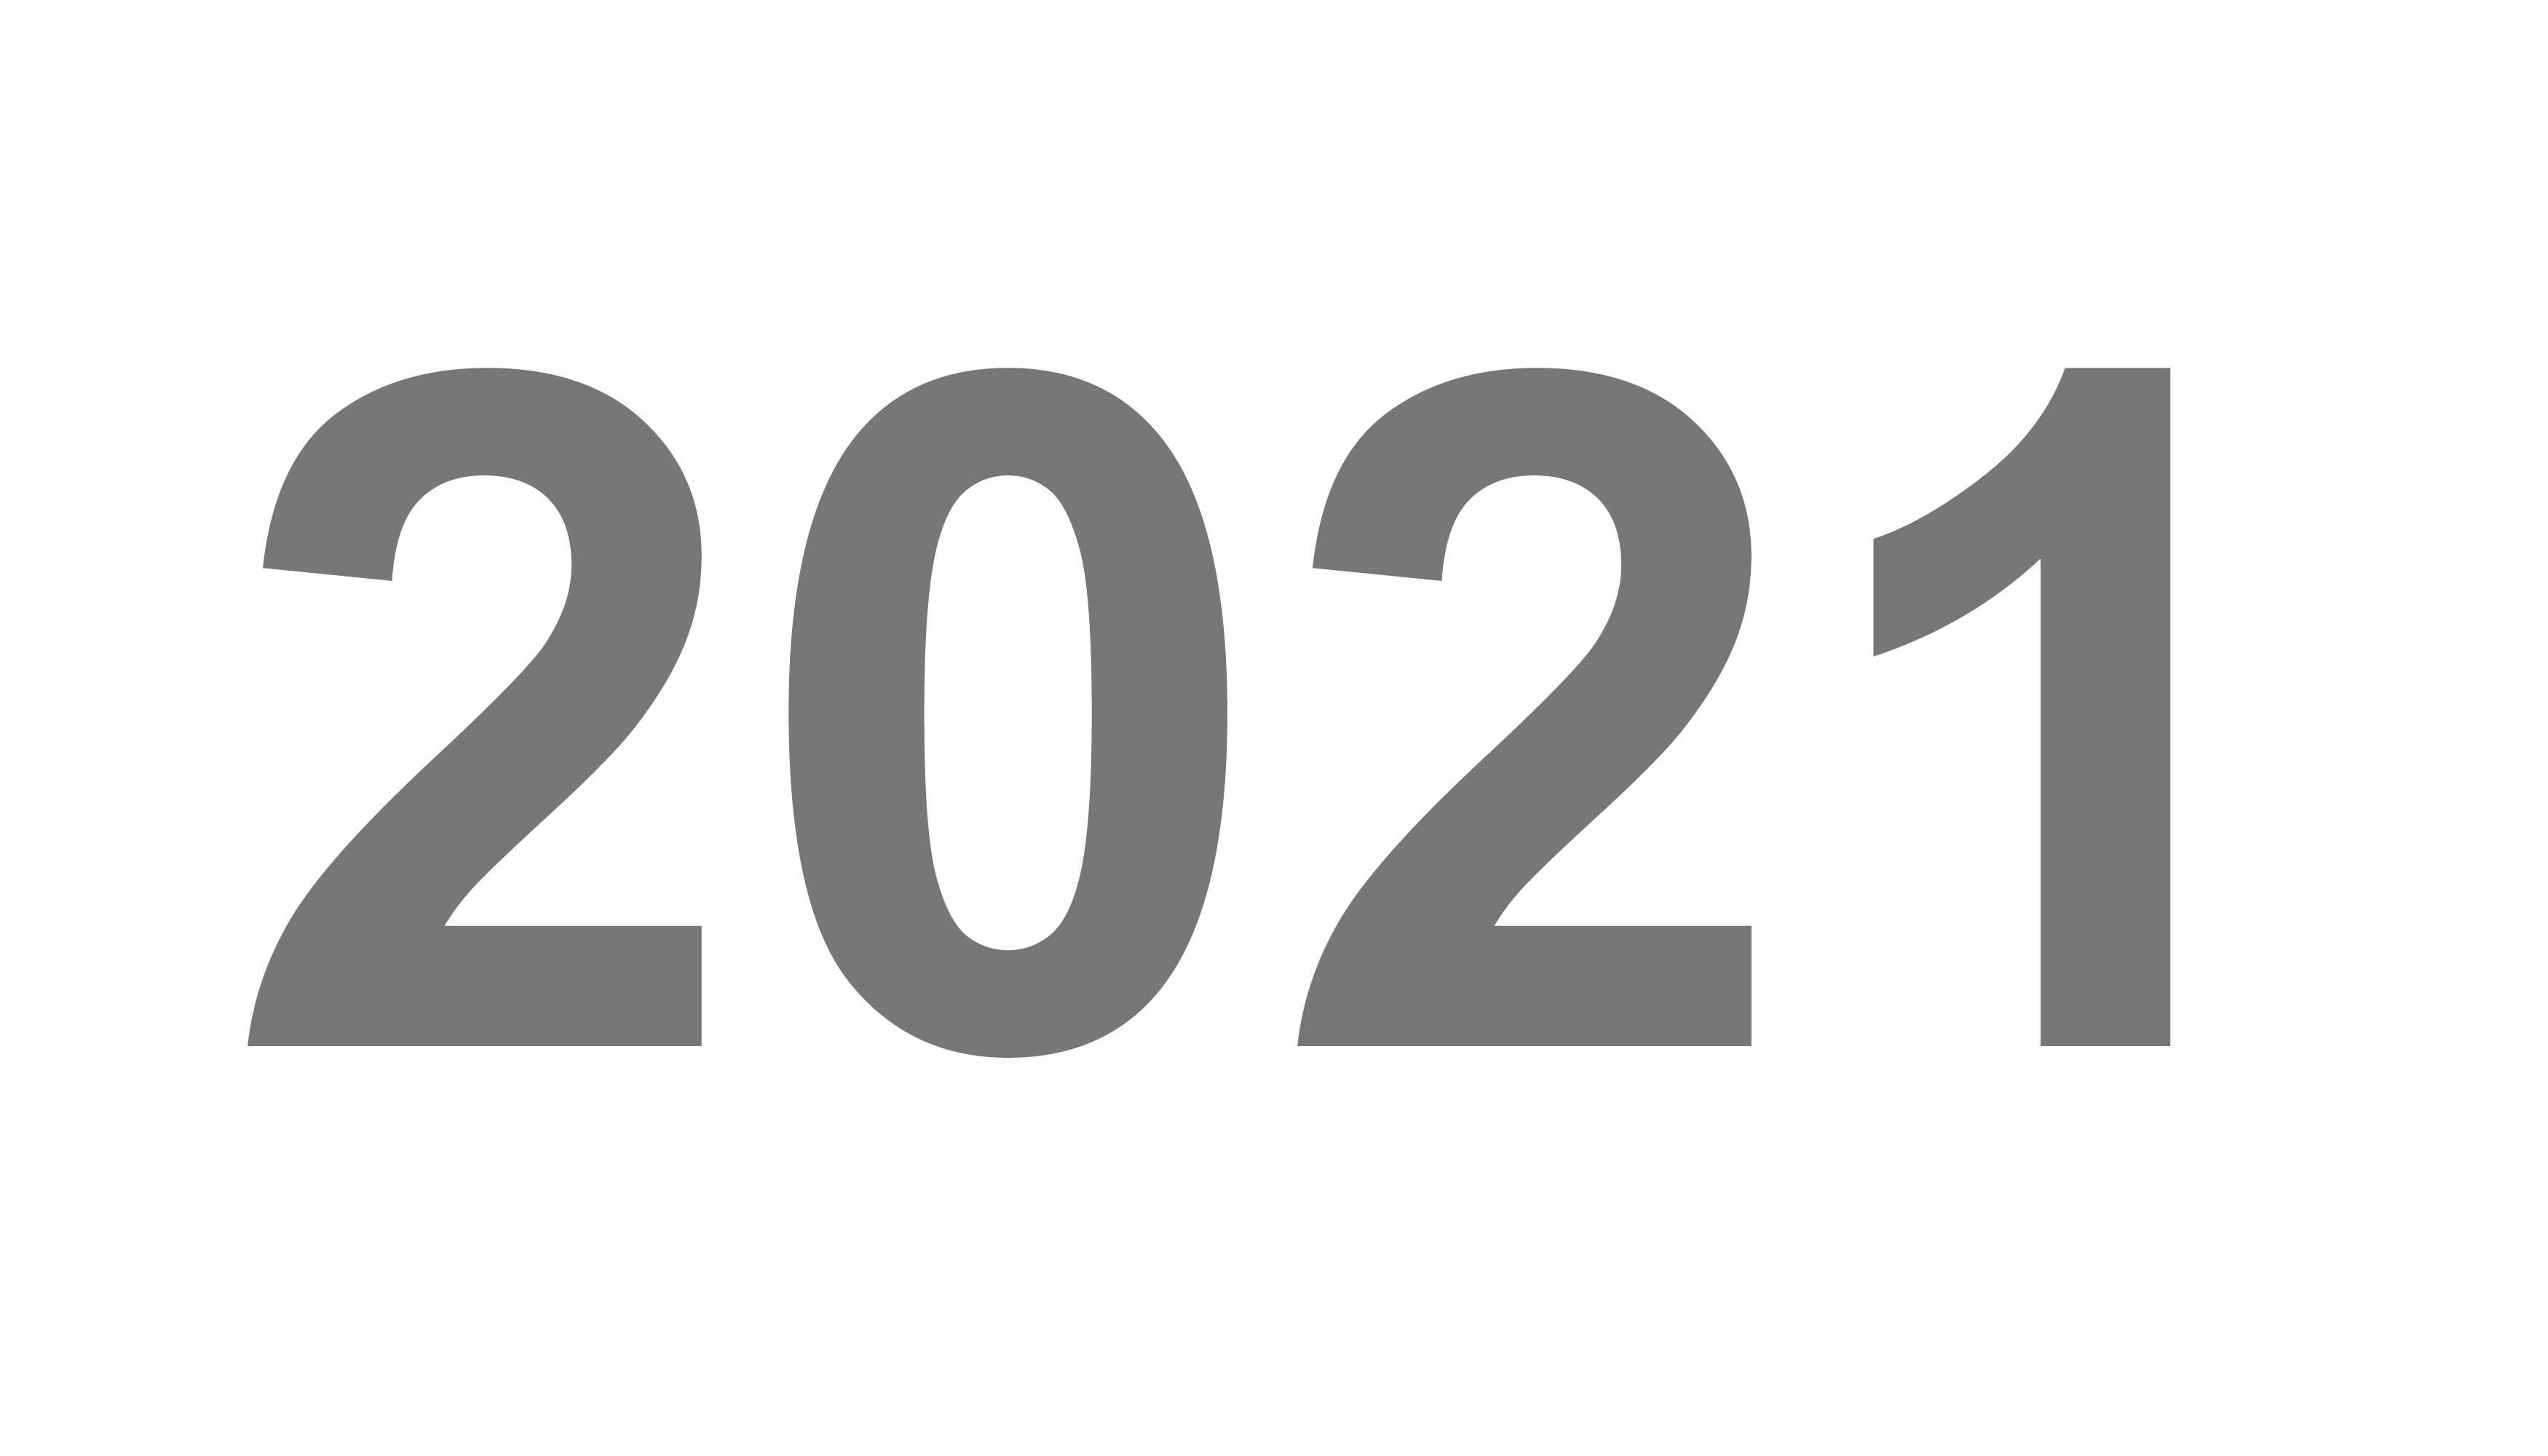 2021 Gray Text Happy New Year Transparent PNG